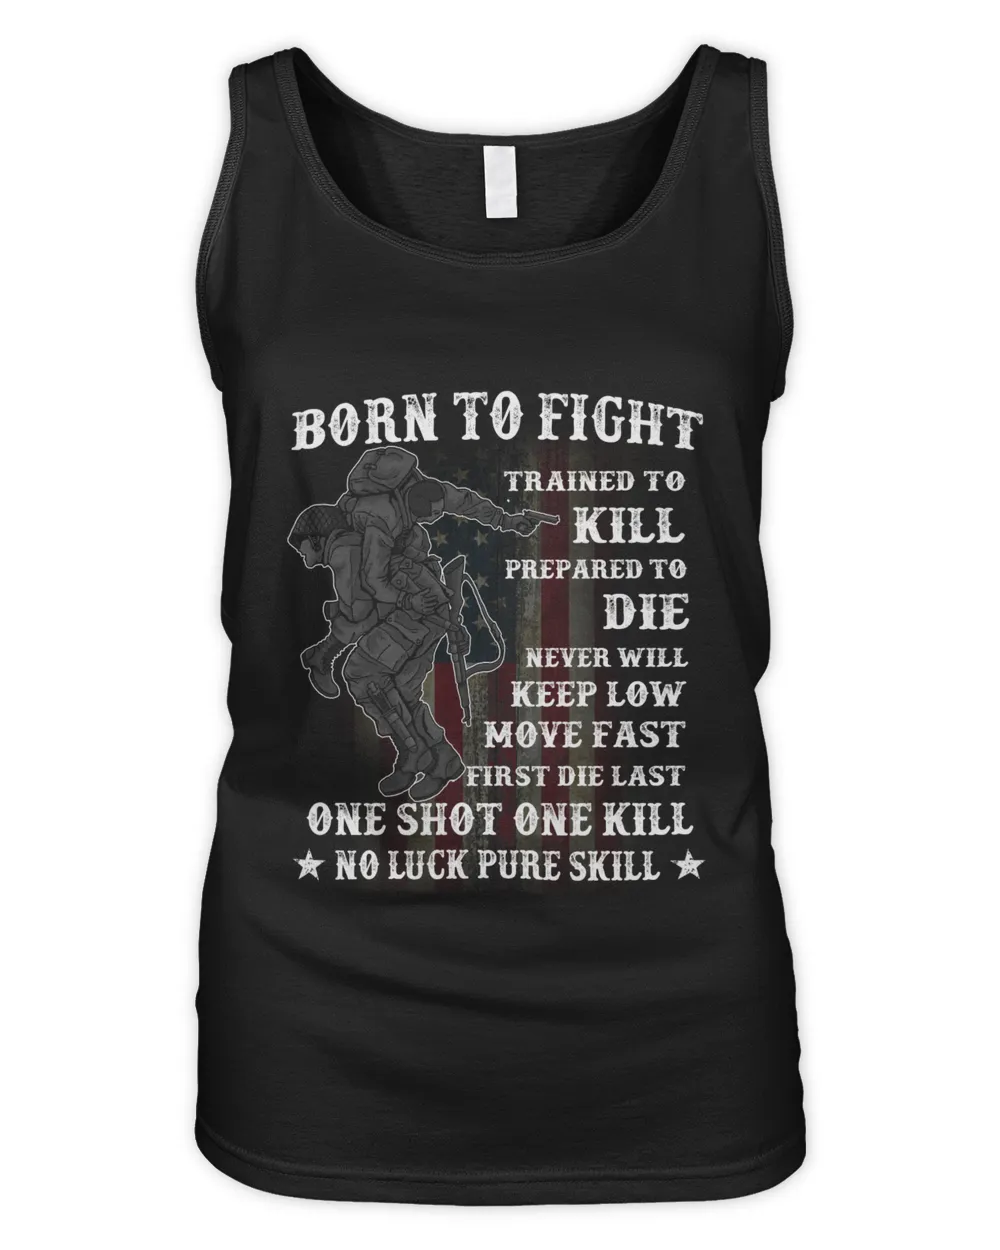 BORN TO FIGHT TRAINED TO KILL PREPARED TO DIE NEVER WILL KEEP LOW MOVE FAST FIRST DIE LAST ONE SHOT ONE KILL NO LUCK PURE SKILL